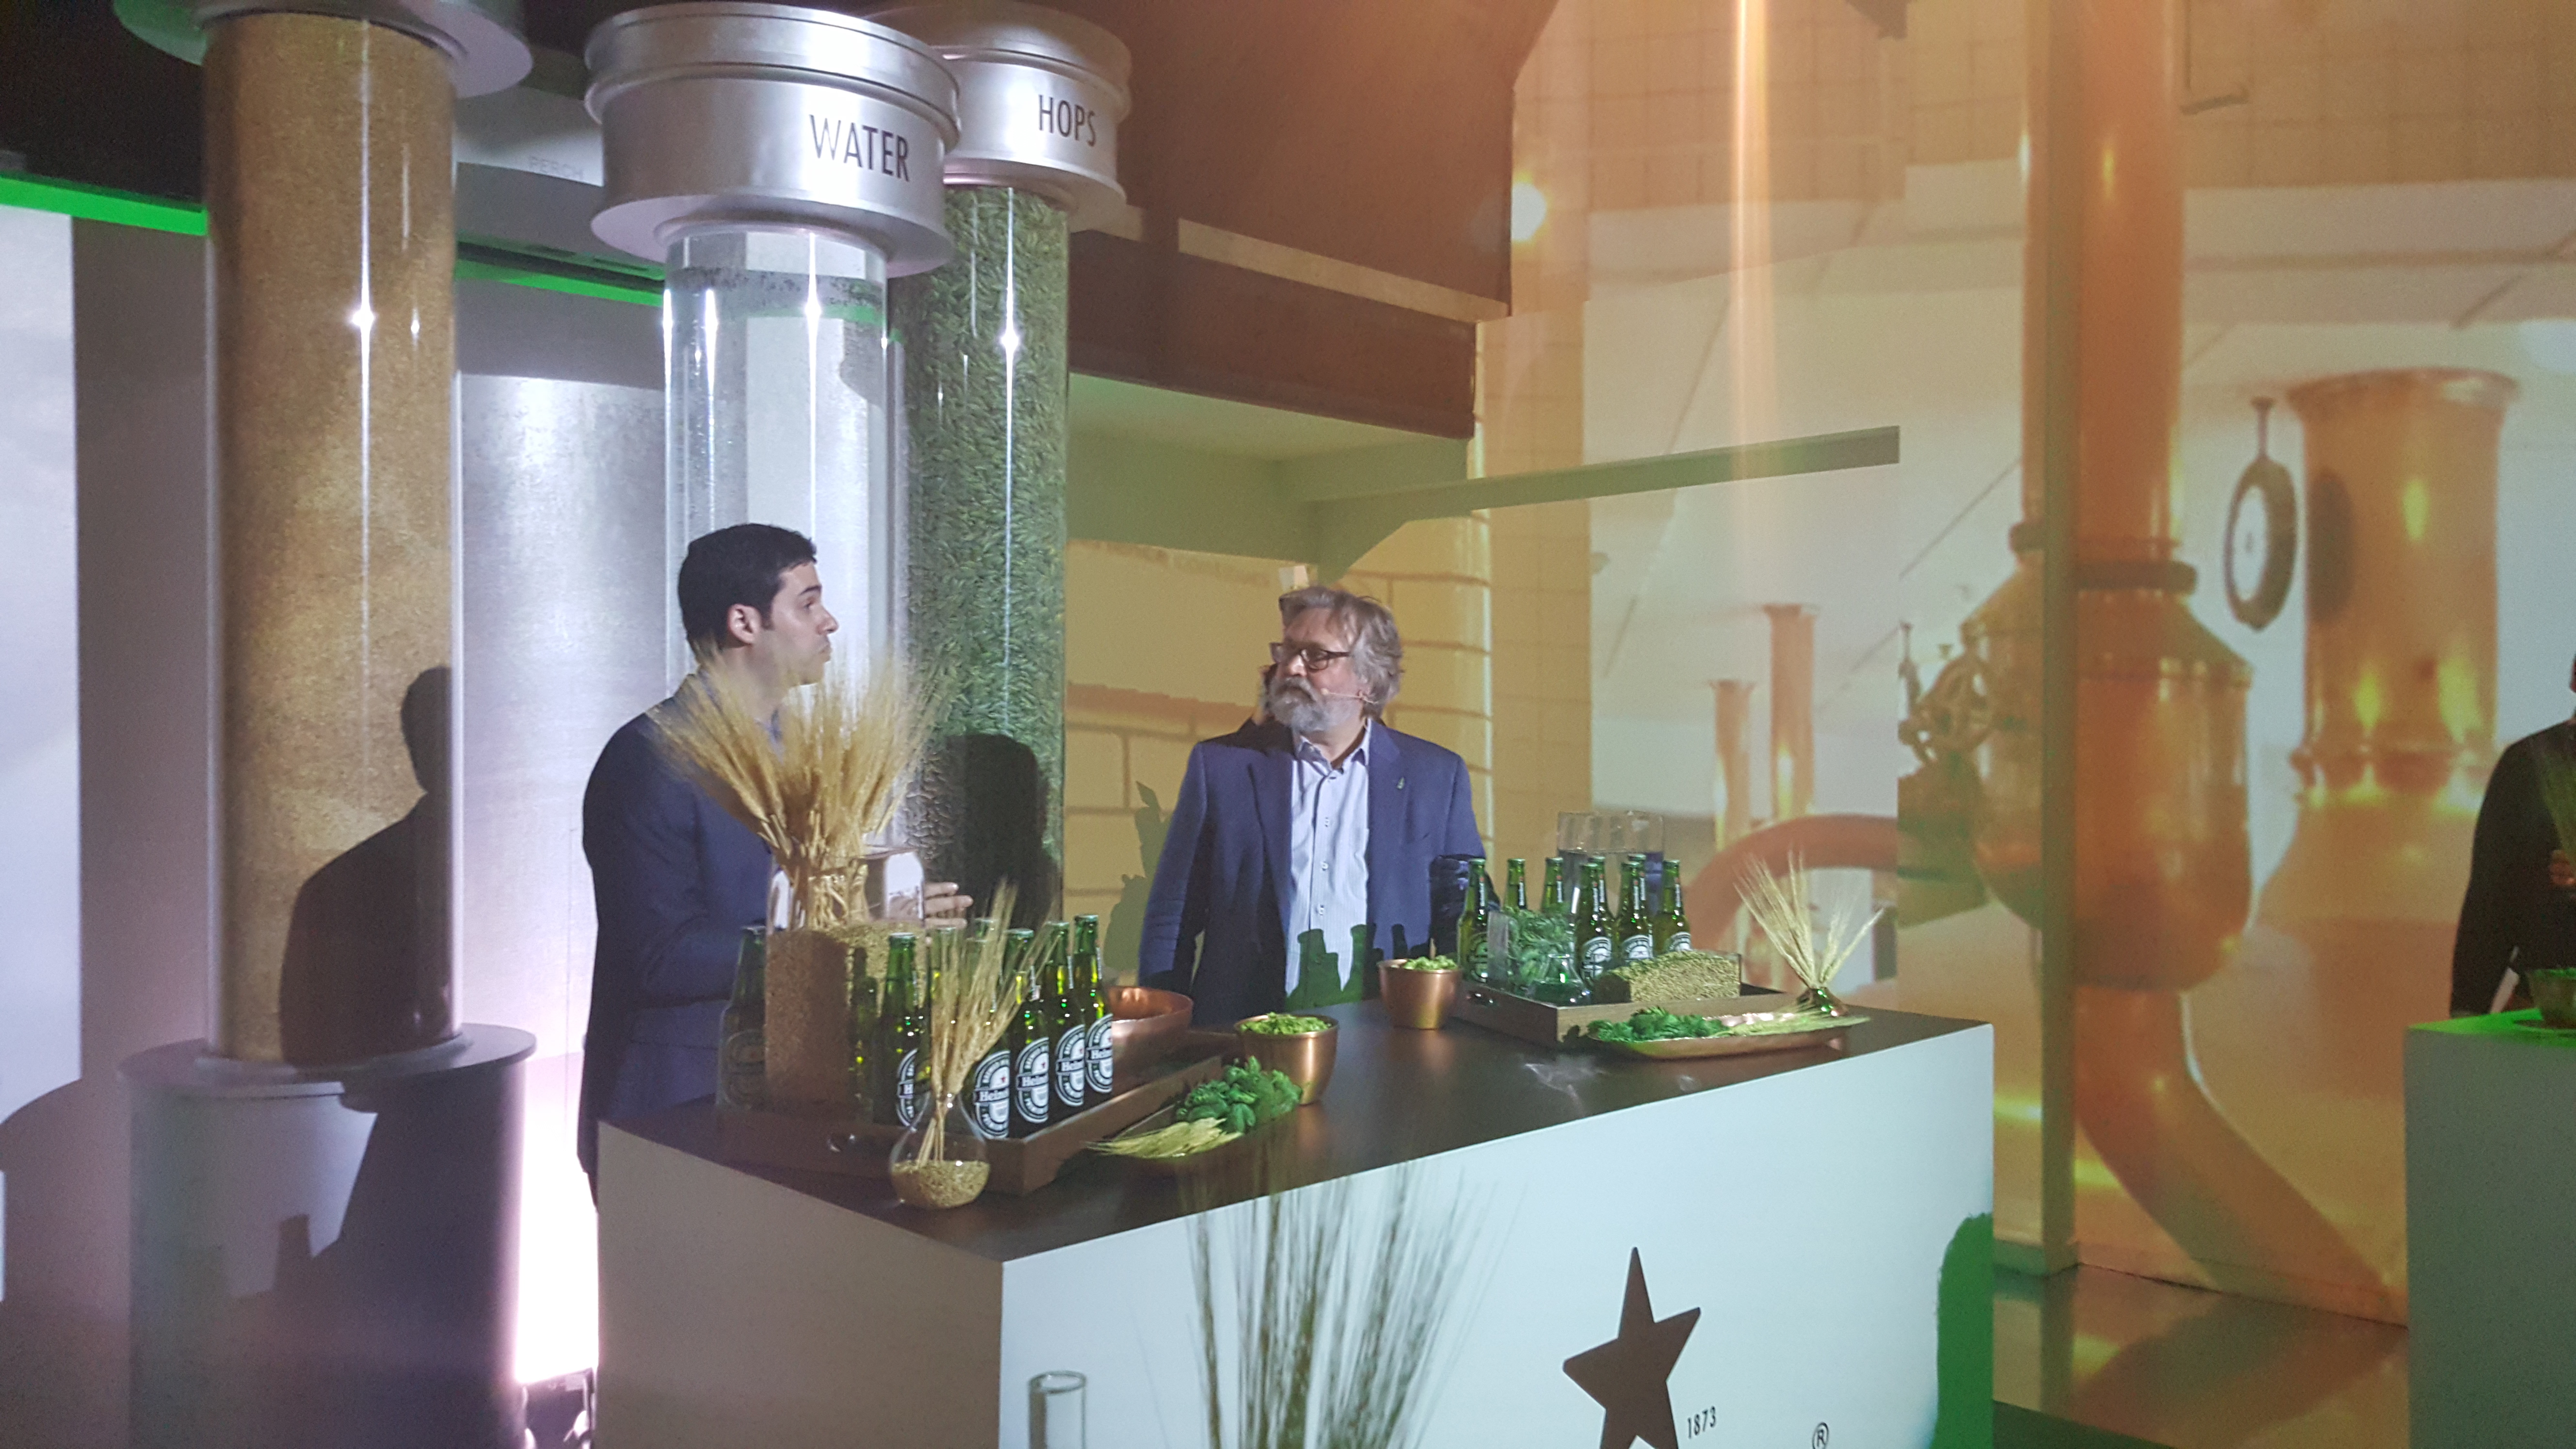 Heineken Gives Fans A History Lesson At Private Master Class In NYC